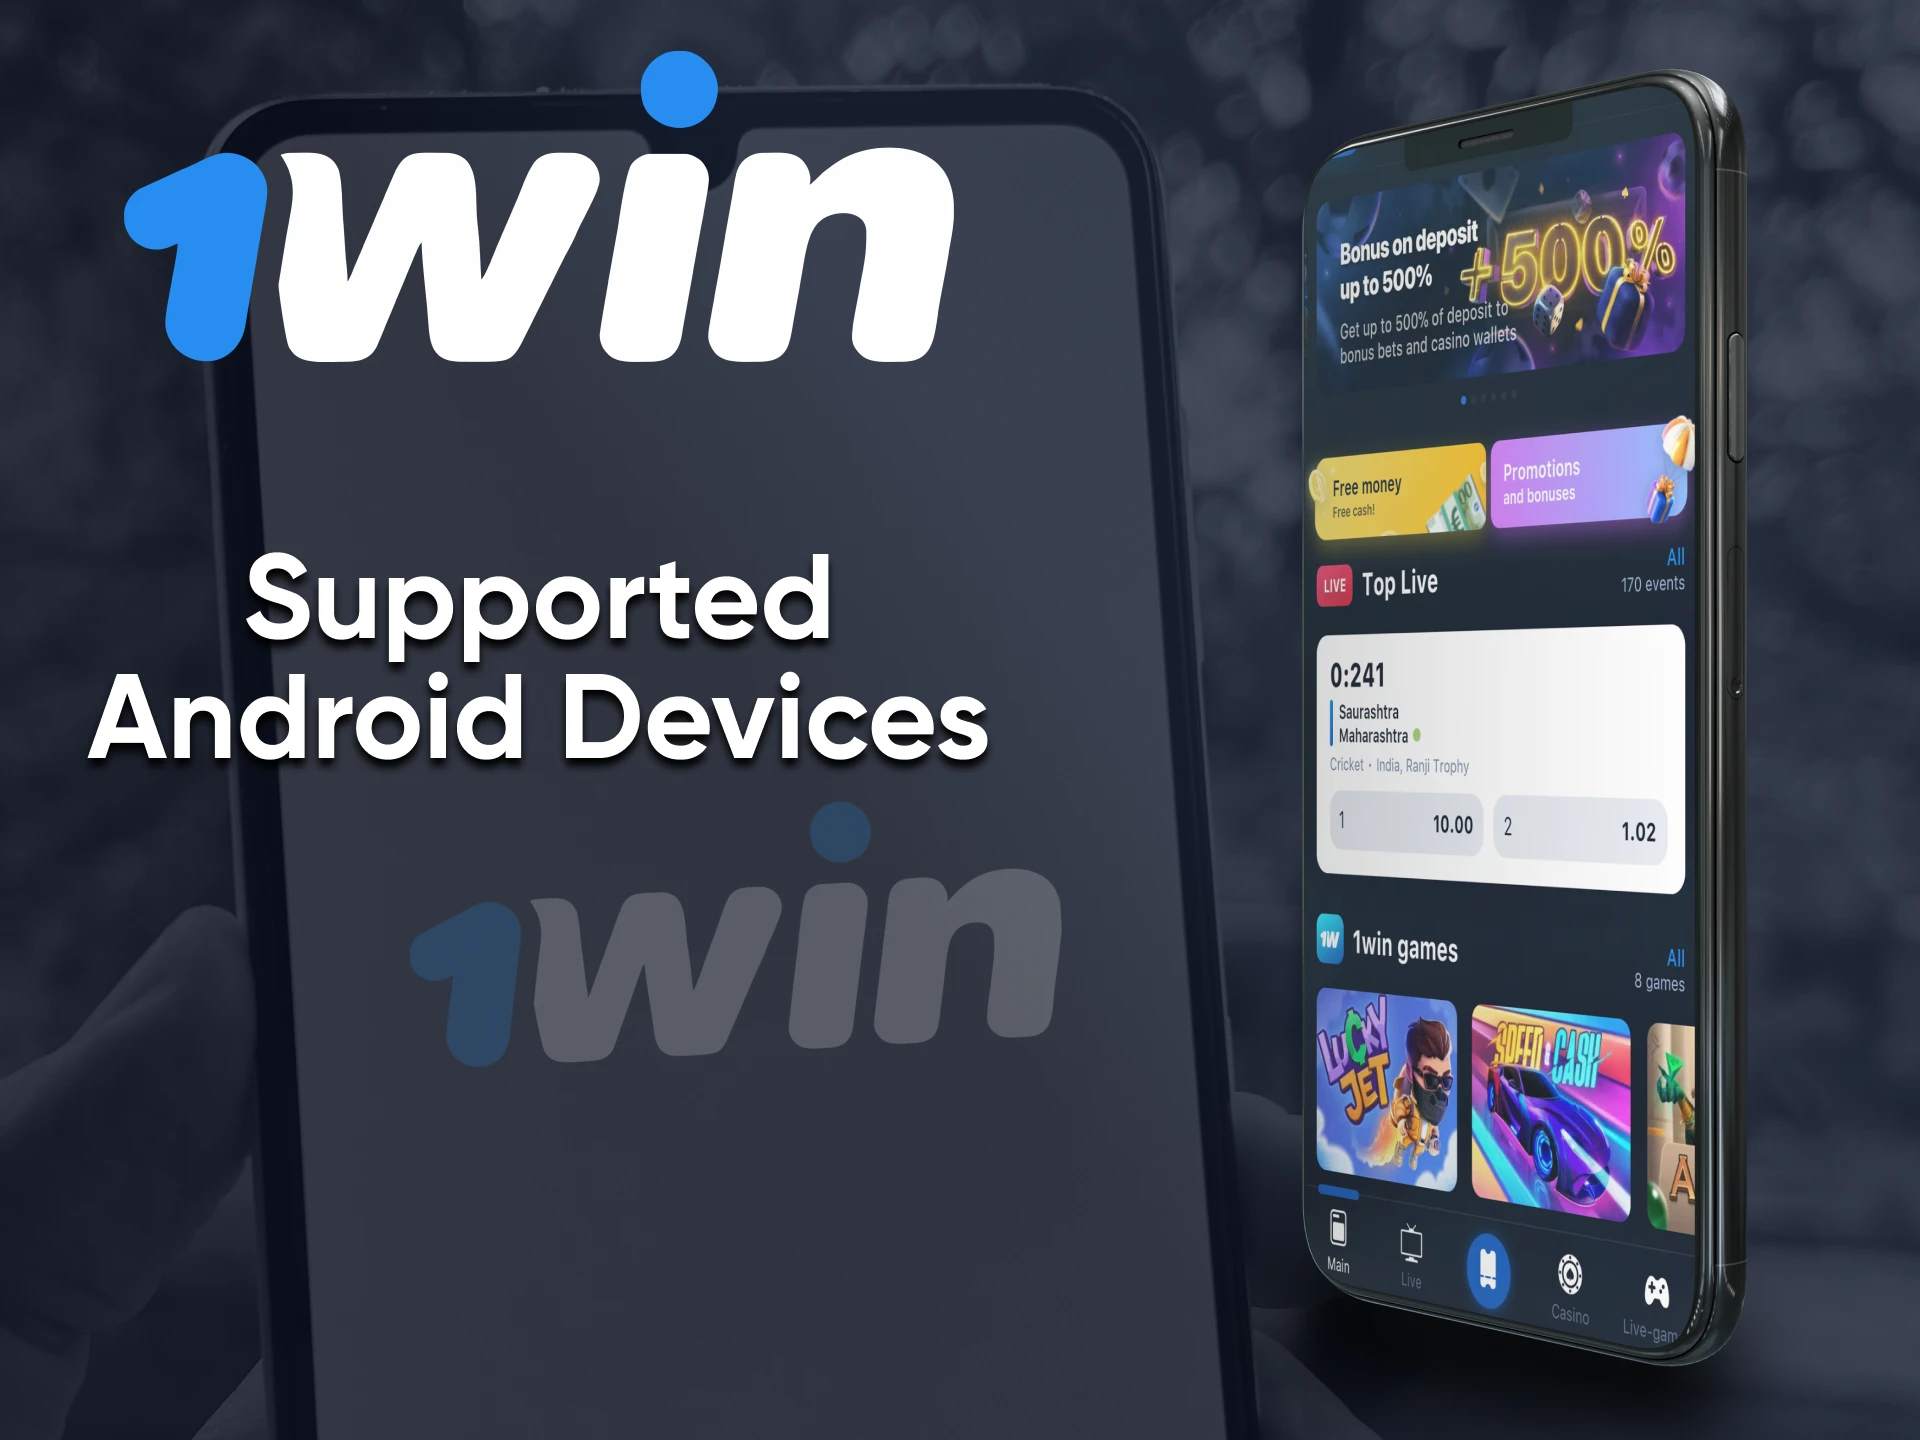 For the convenience of playing at the 1win casino, you can use the application on your phone.